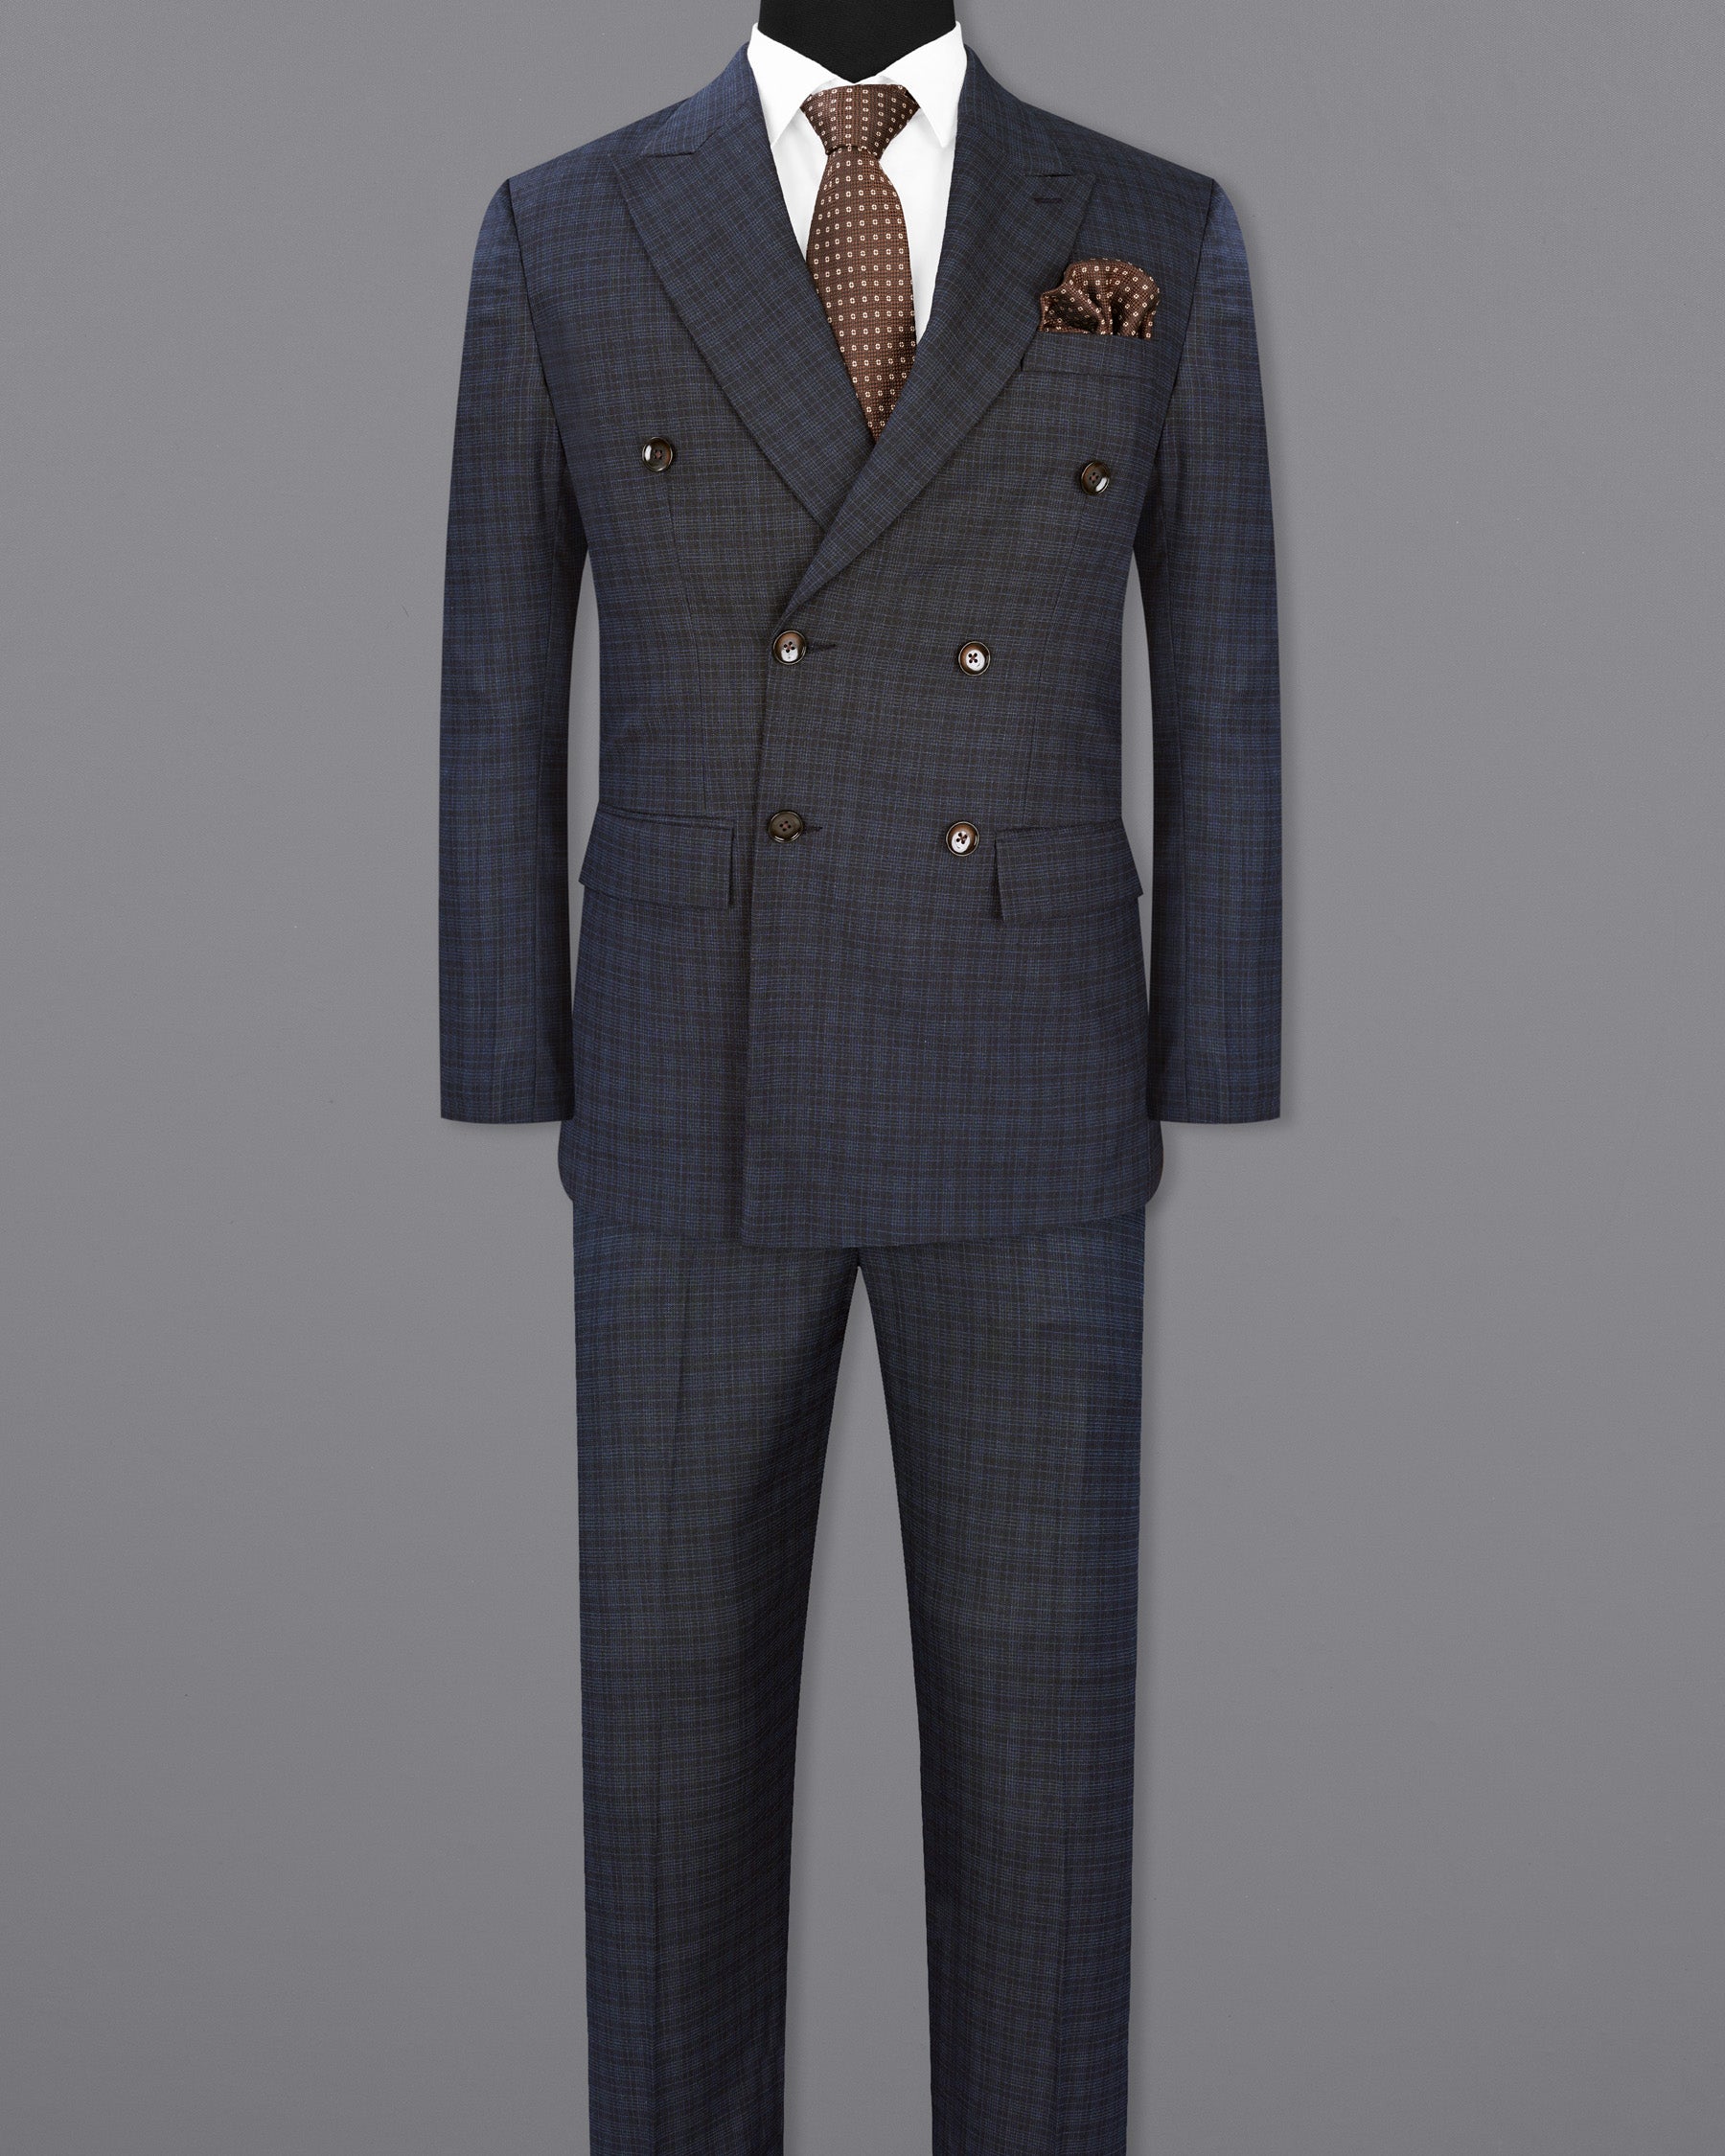 Ebony Clay Gray and Metallic Blue Plaid Double-Breasted Suit